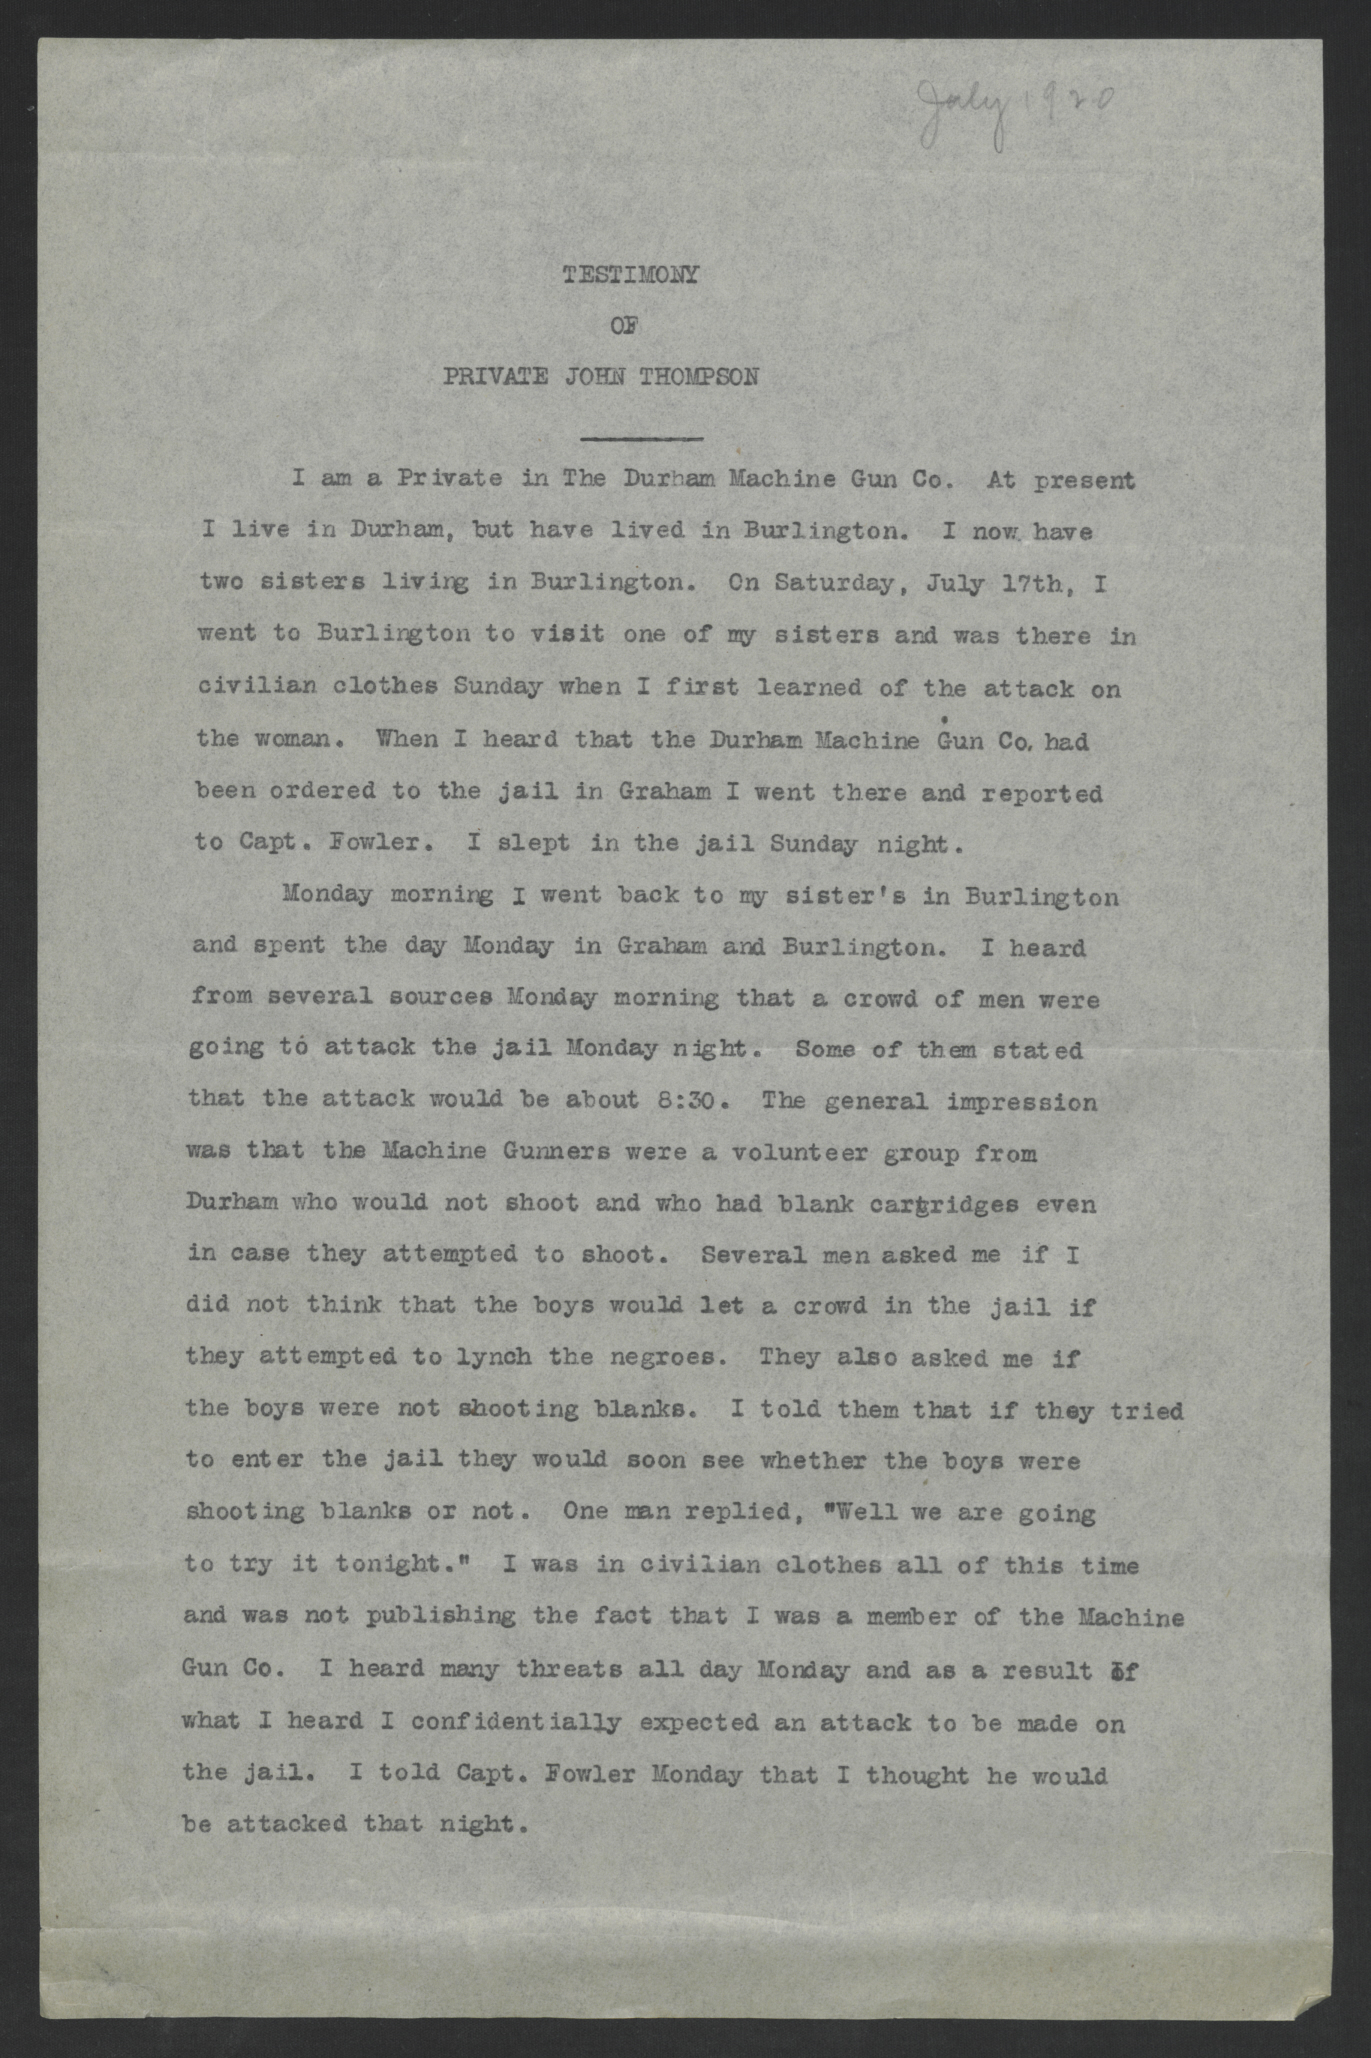 Testimony of Private John Thompson, August 2, 1920, page 1